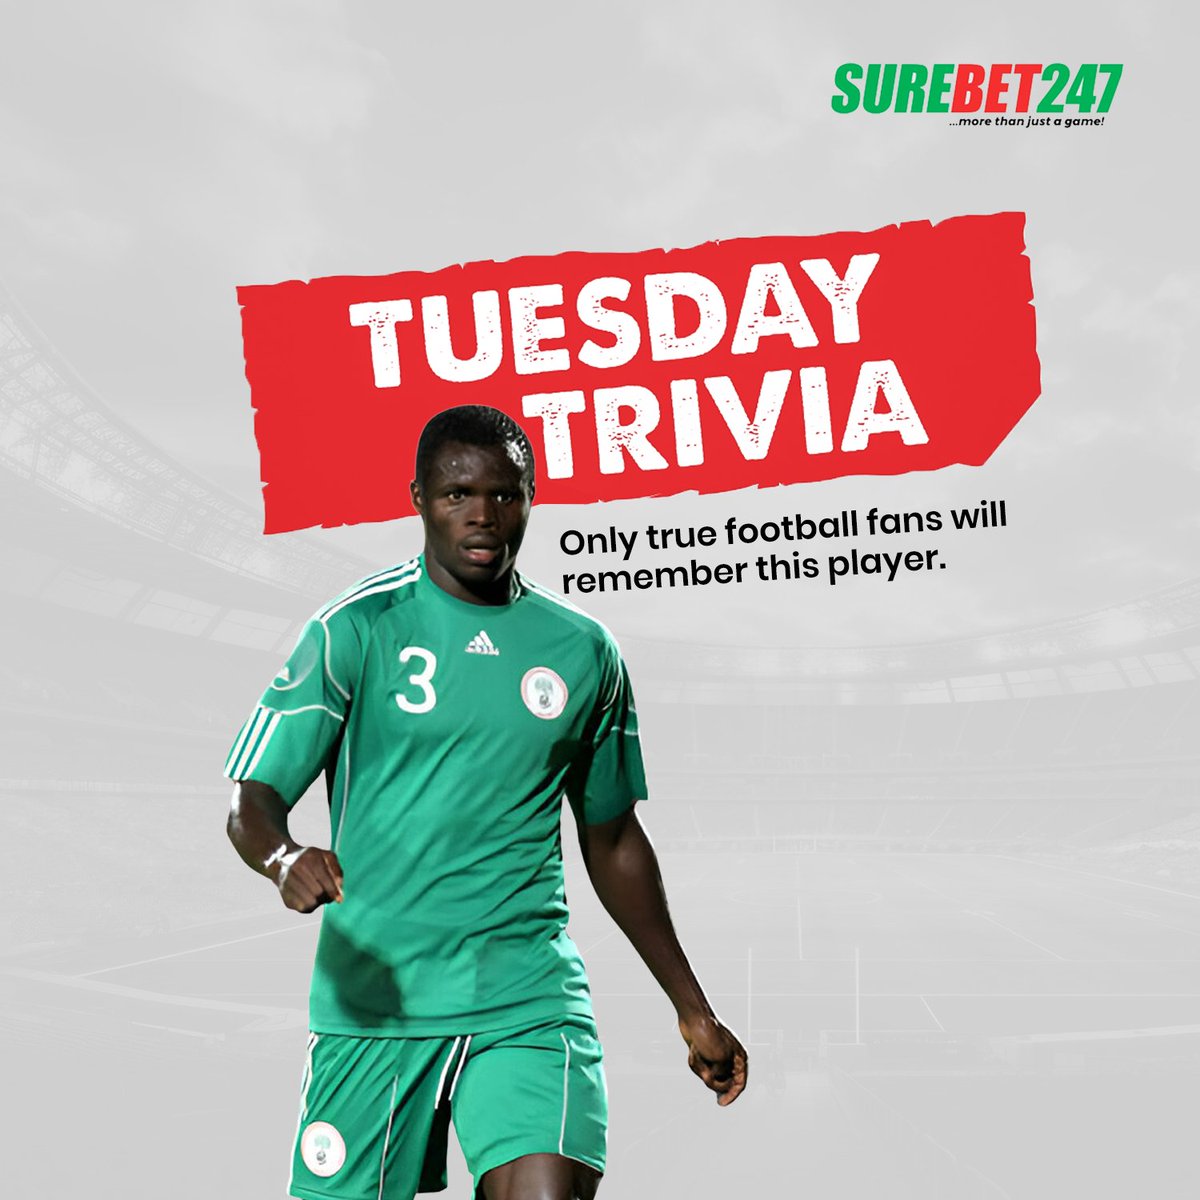 Only true football fans will remember this player. 🇳🇬

Guess who? 🤔

#surebet247 #surebet #güesswho #footballfans #TuesdayTrivia